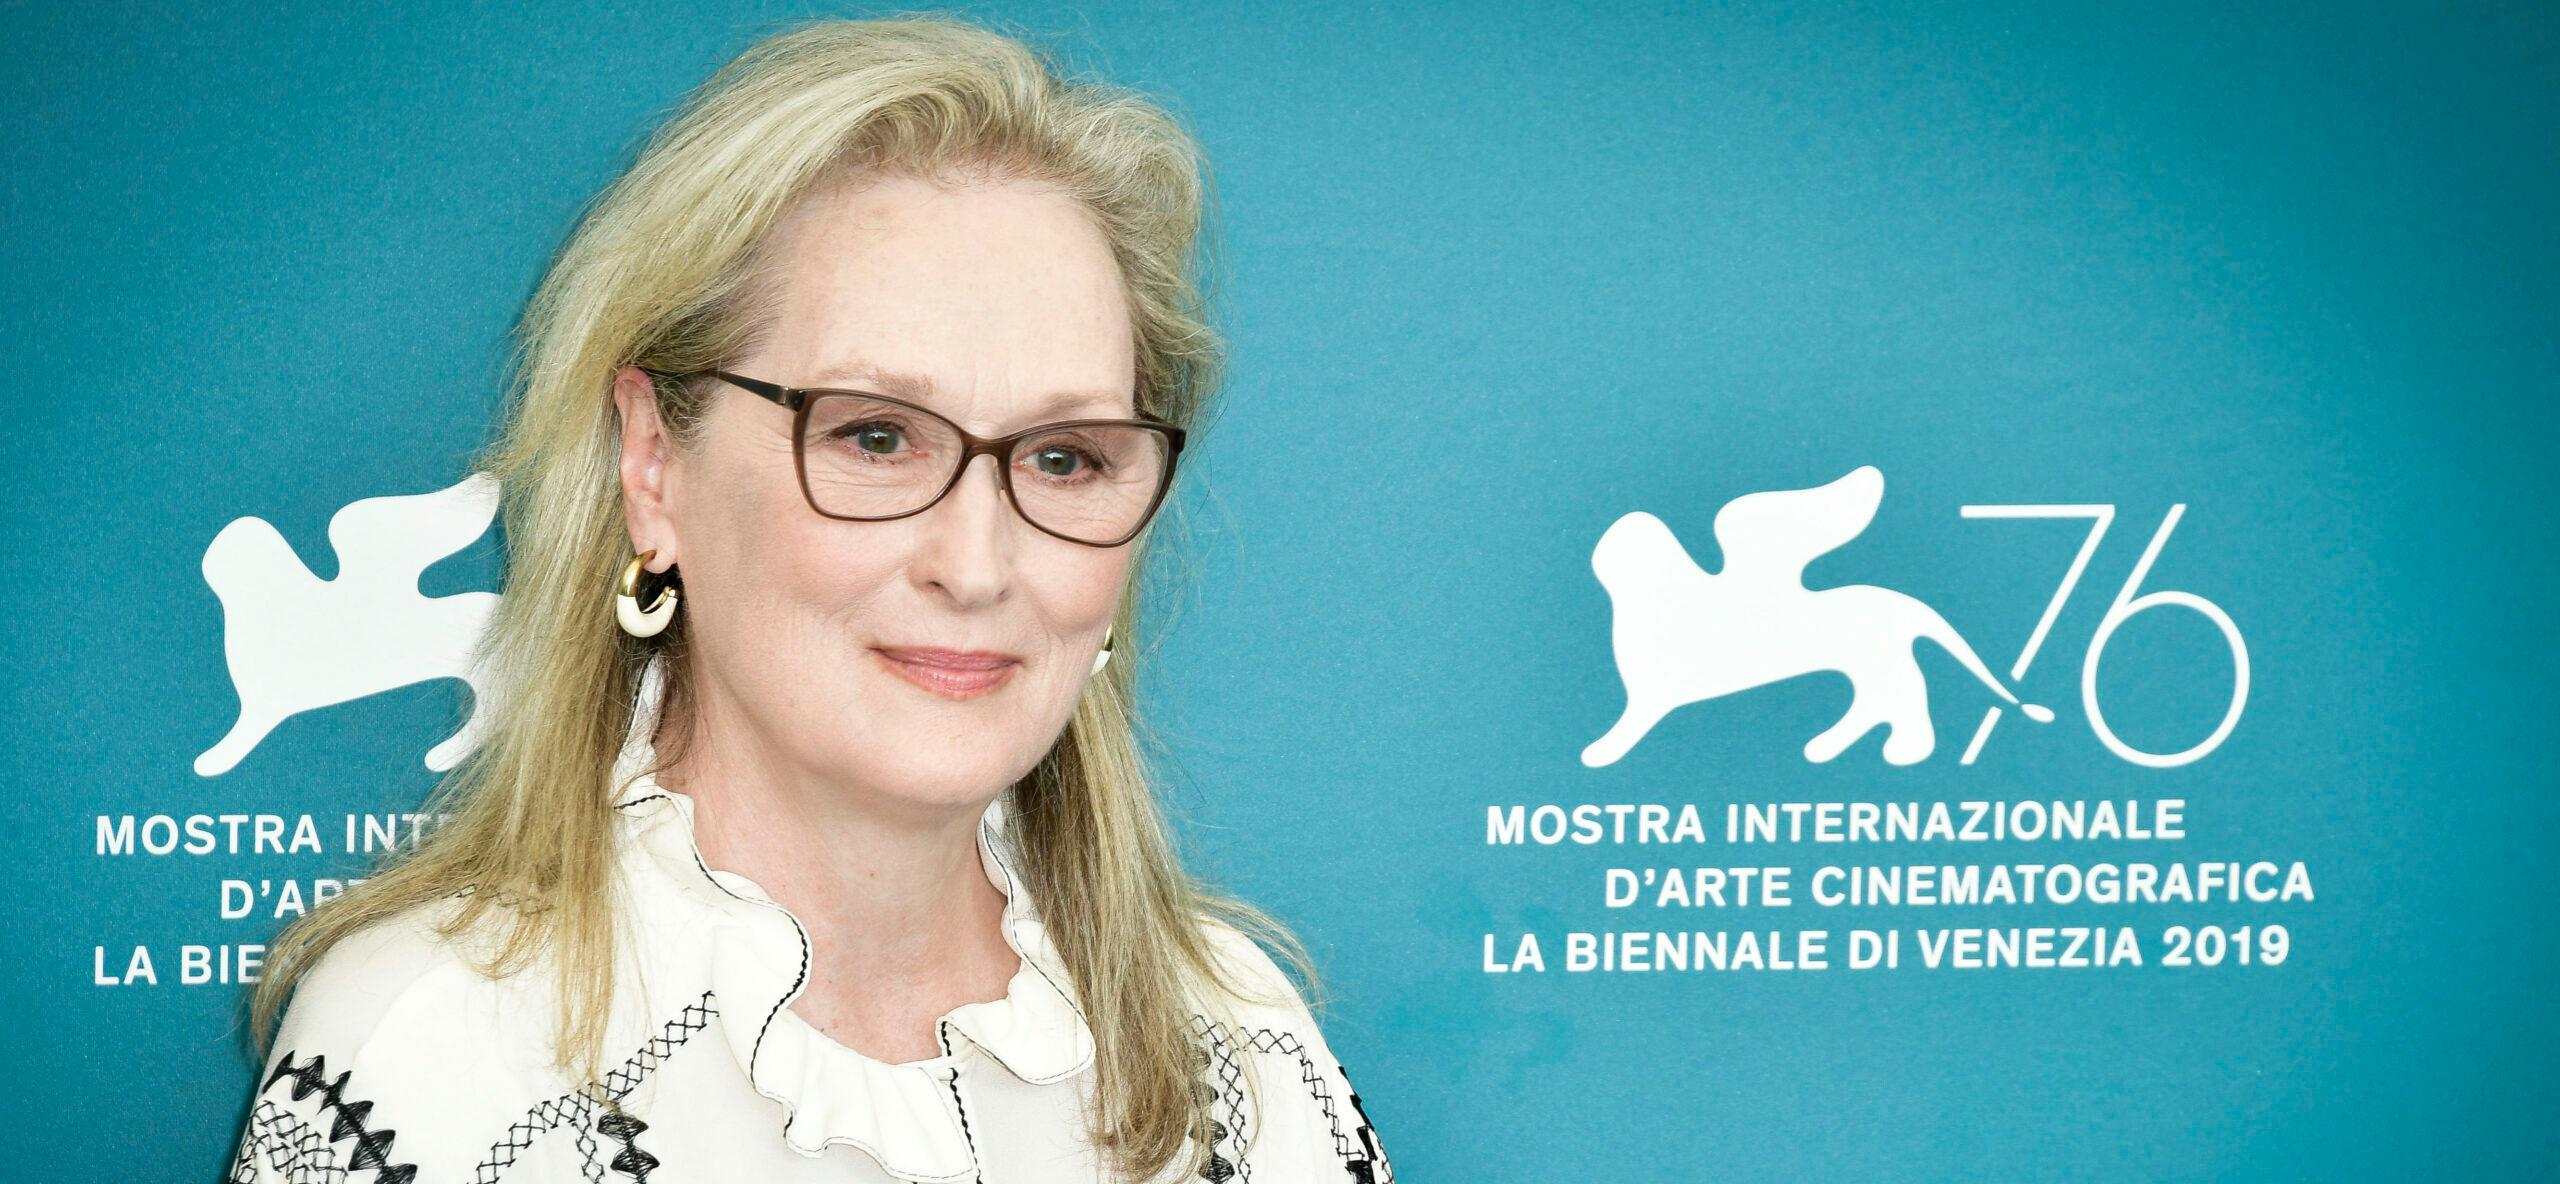 Meryl Streep Joins All-Star Cast Of ‘Only Murders In The Building’ Season 3